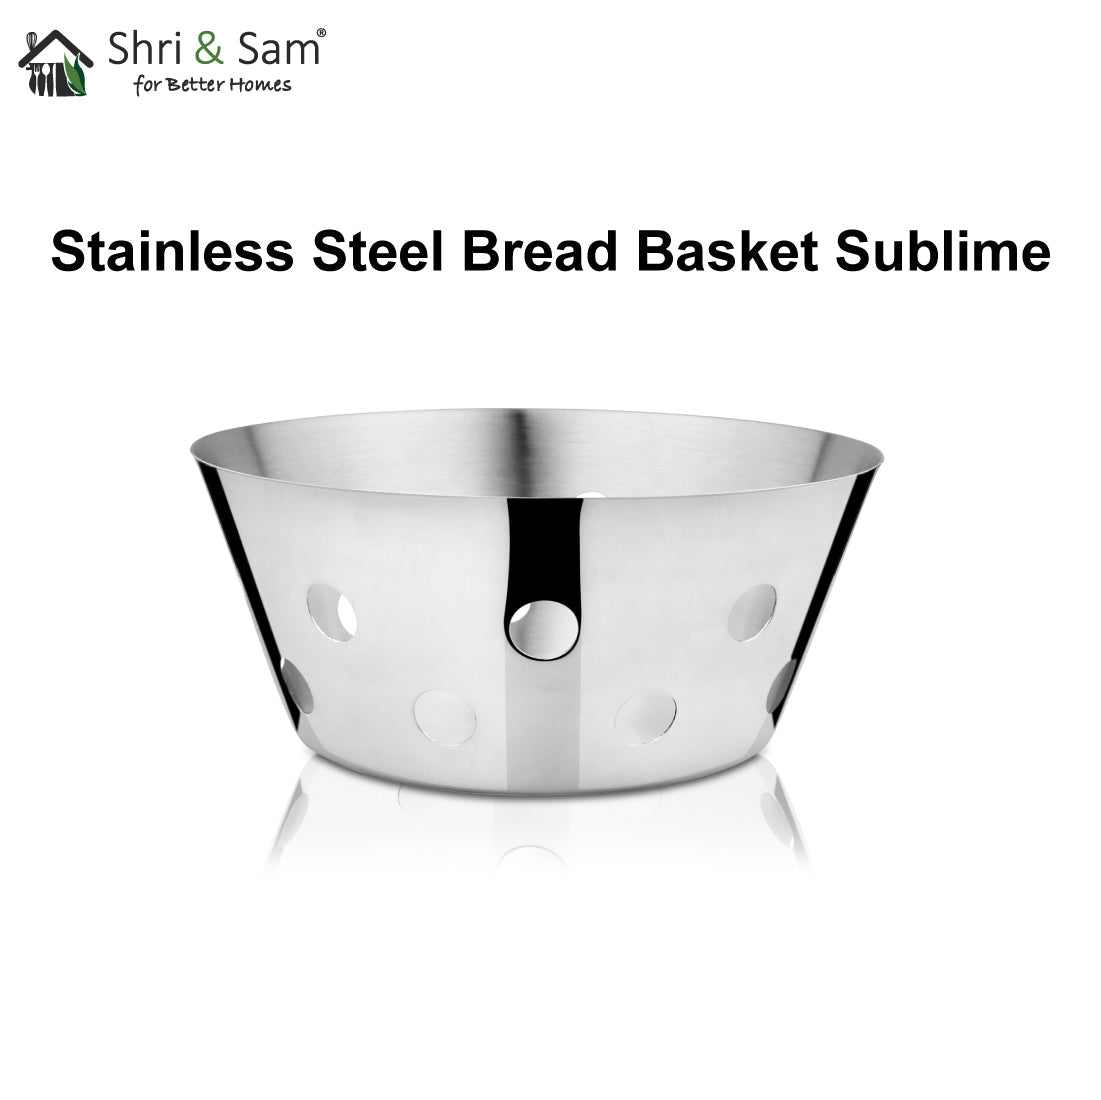 Stainless Steel Bread Basket Sublime